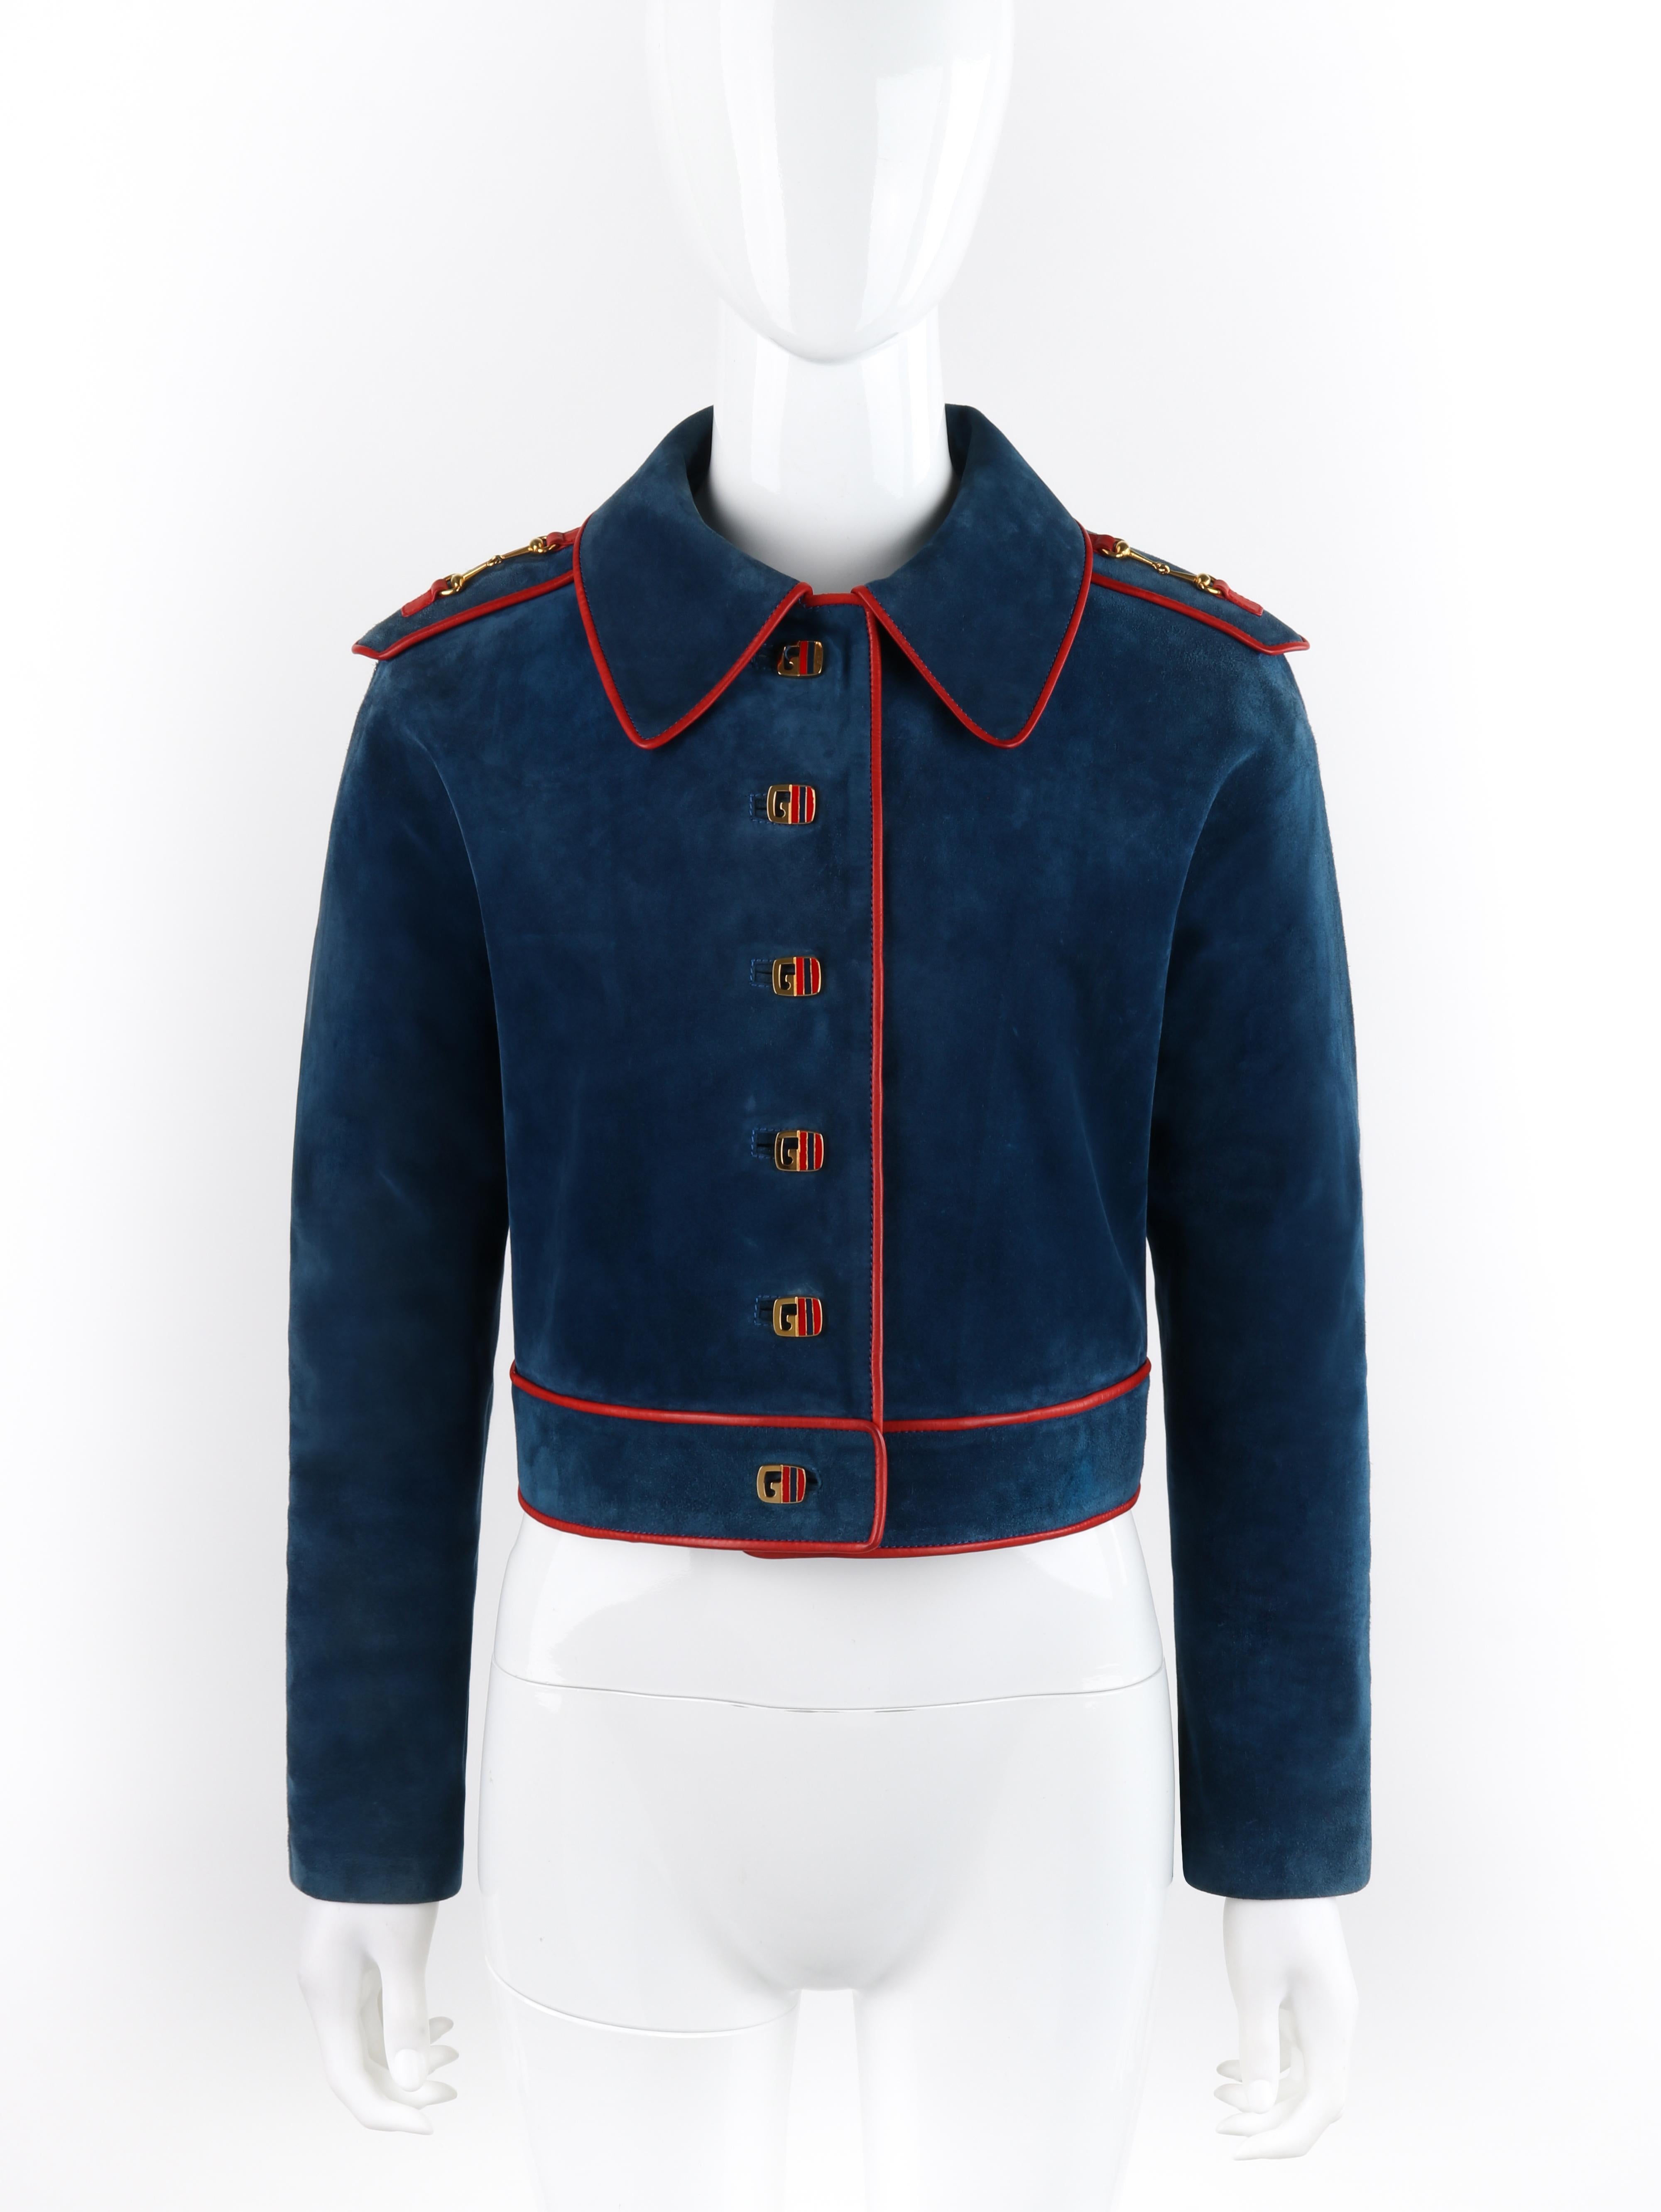 Brand / Manufacturer: Gucci
Circa: 1970s
Style: Cropped Jacket
Color(s): Shades of blue, red, gold
Lined: Yes 
Unmarked Fabric Content (feel of): Suede (primary fabric), leather (trim), silk (lining), metal (hardware)
Additional Details /